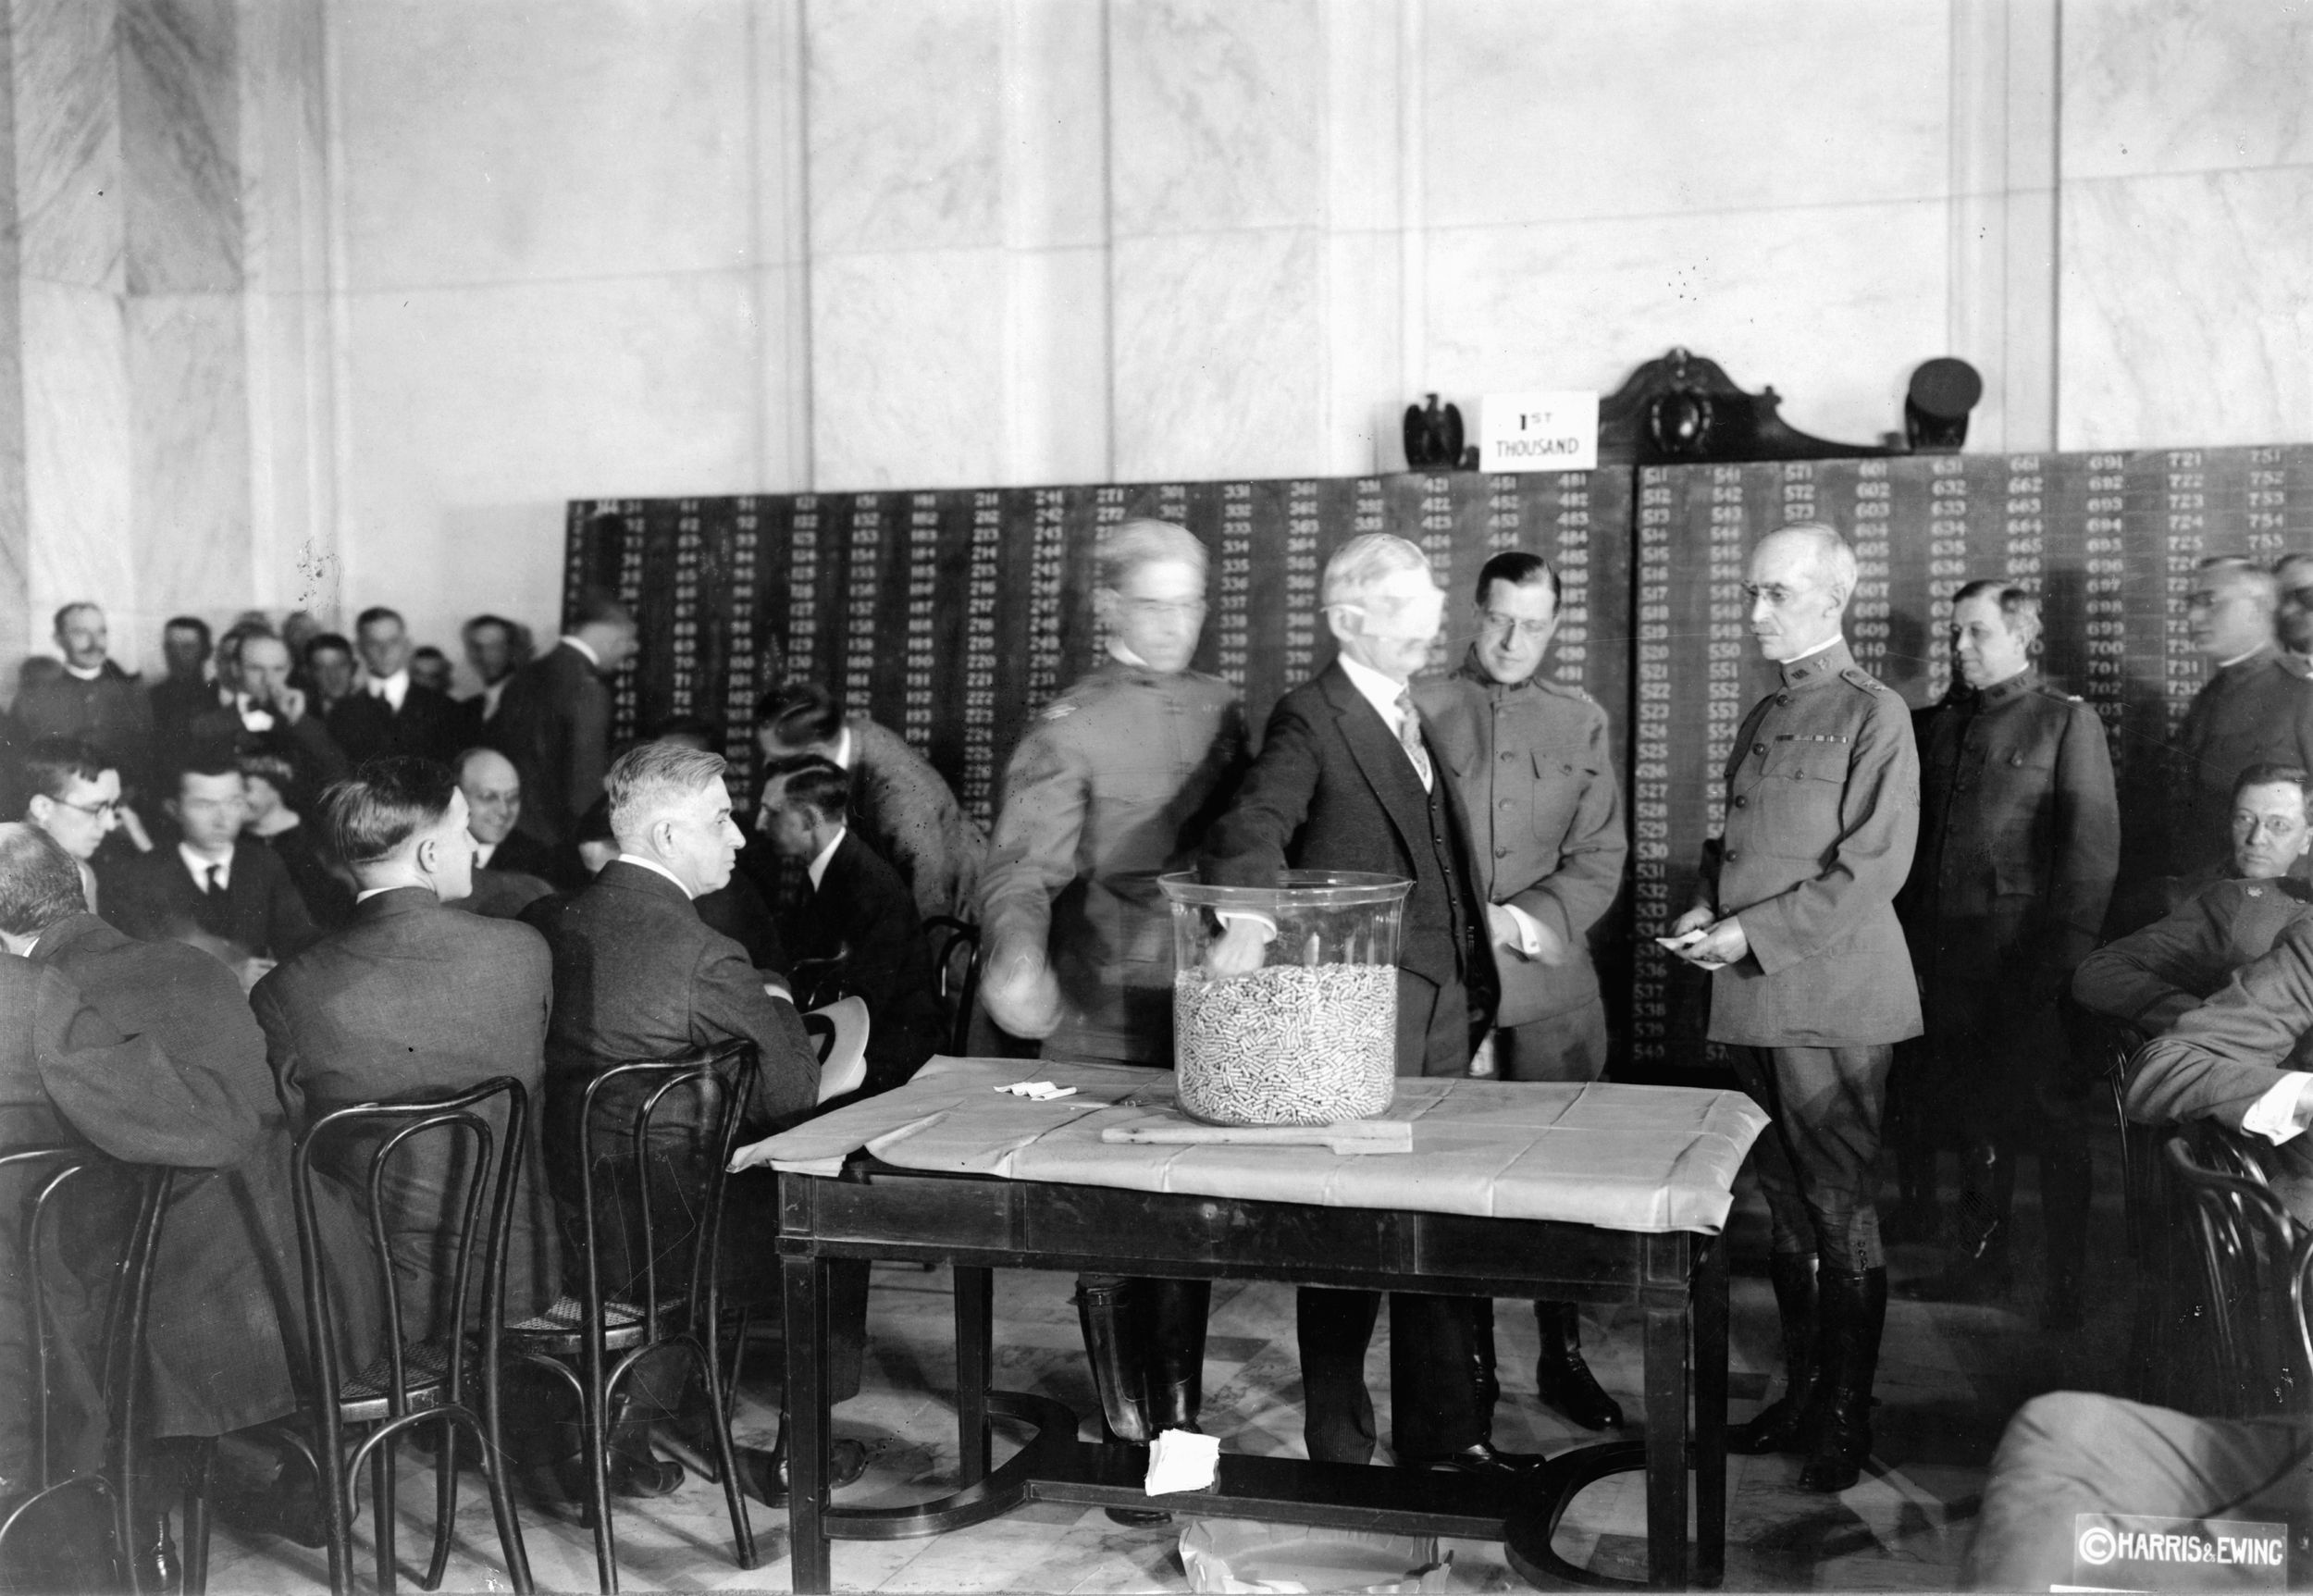 Vice President Thomas R. Marshall draws a draft capsule from a bin during a ceremony in 1918. Nearly 3 million men were drafted in World War I.